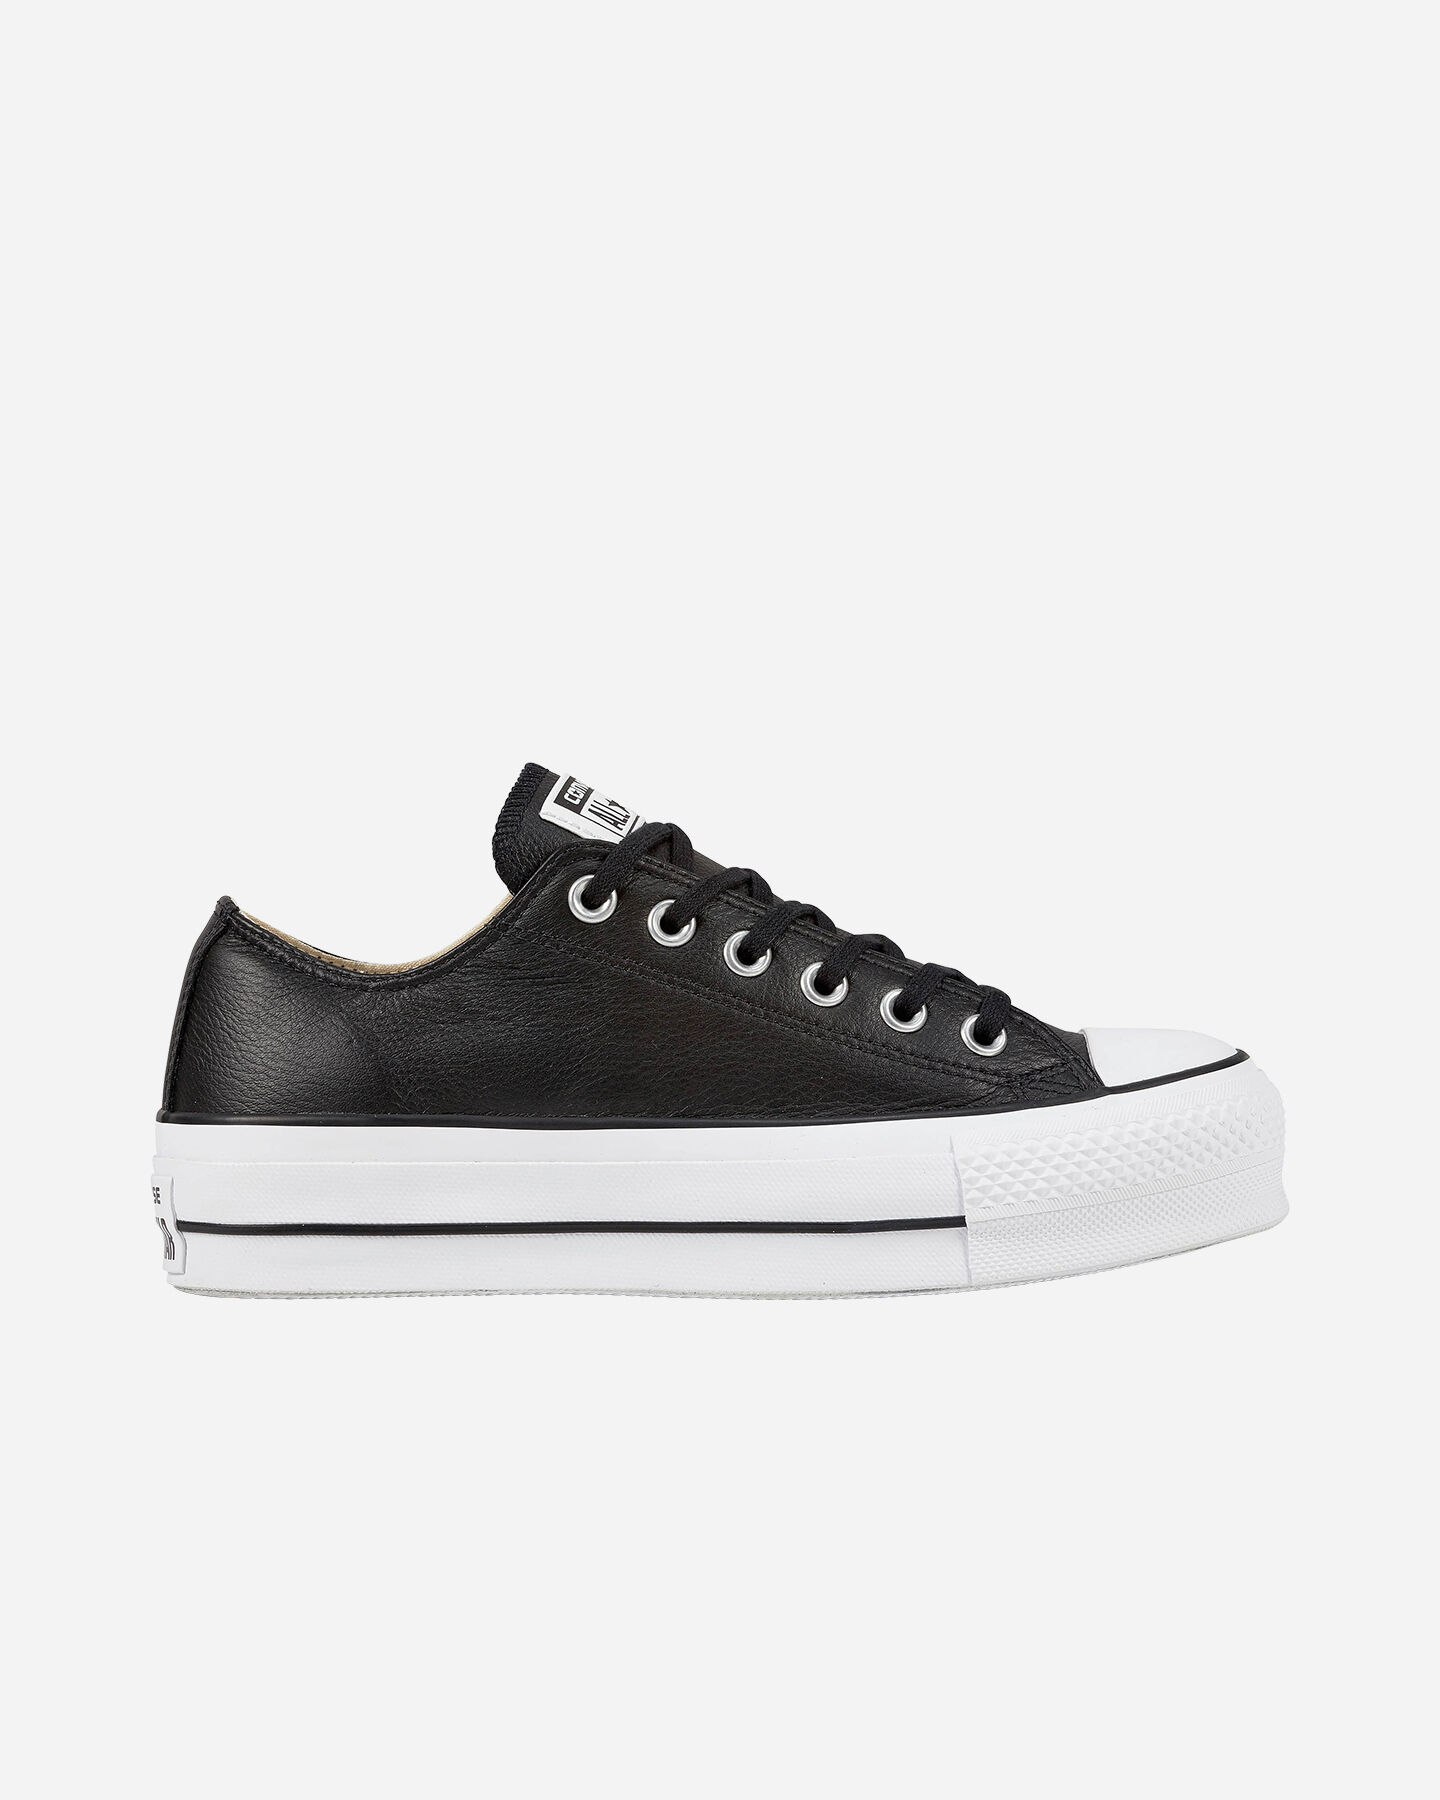  Scarpe sneakers CONVERSE ALL STAR PLATFORM LEATHER OX W S4051914|1|5 scatto 0